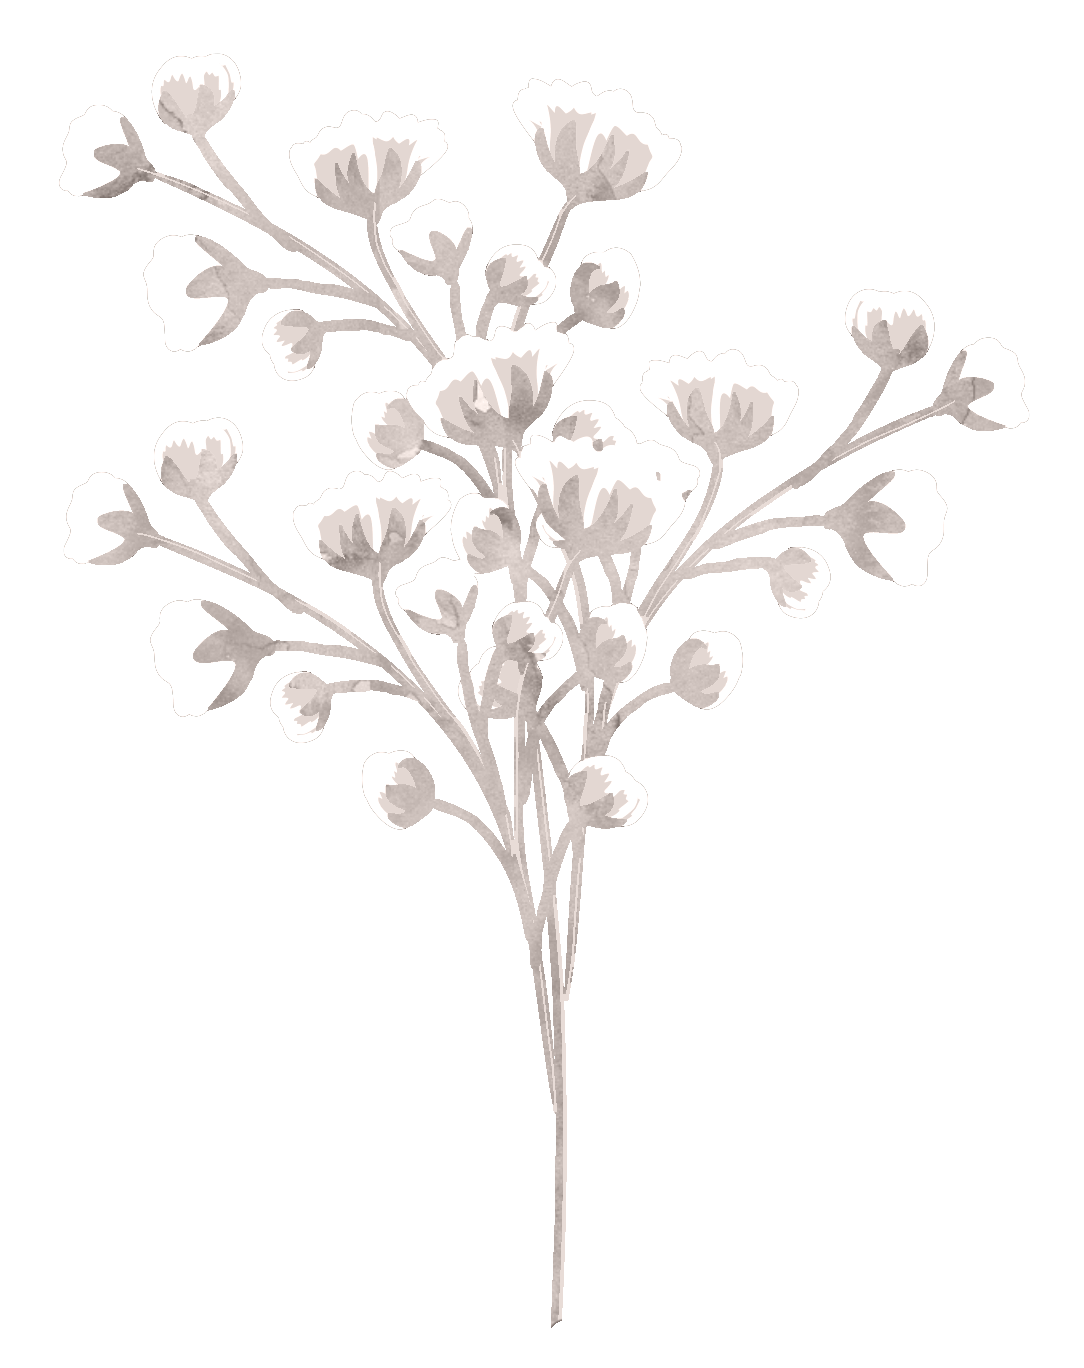 whiteflowers springflowers branches sticker by @stacey4790